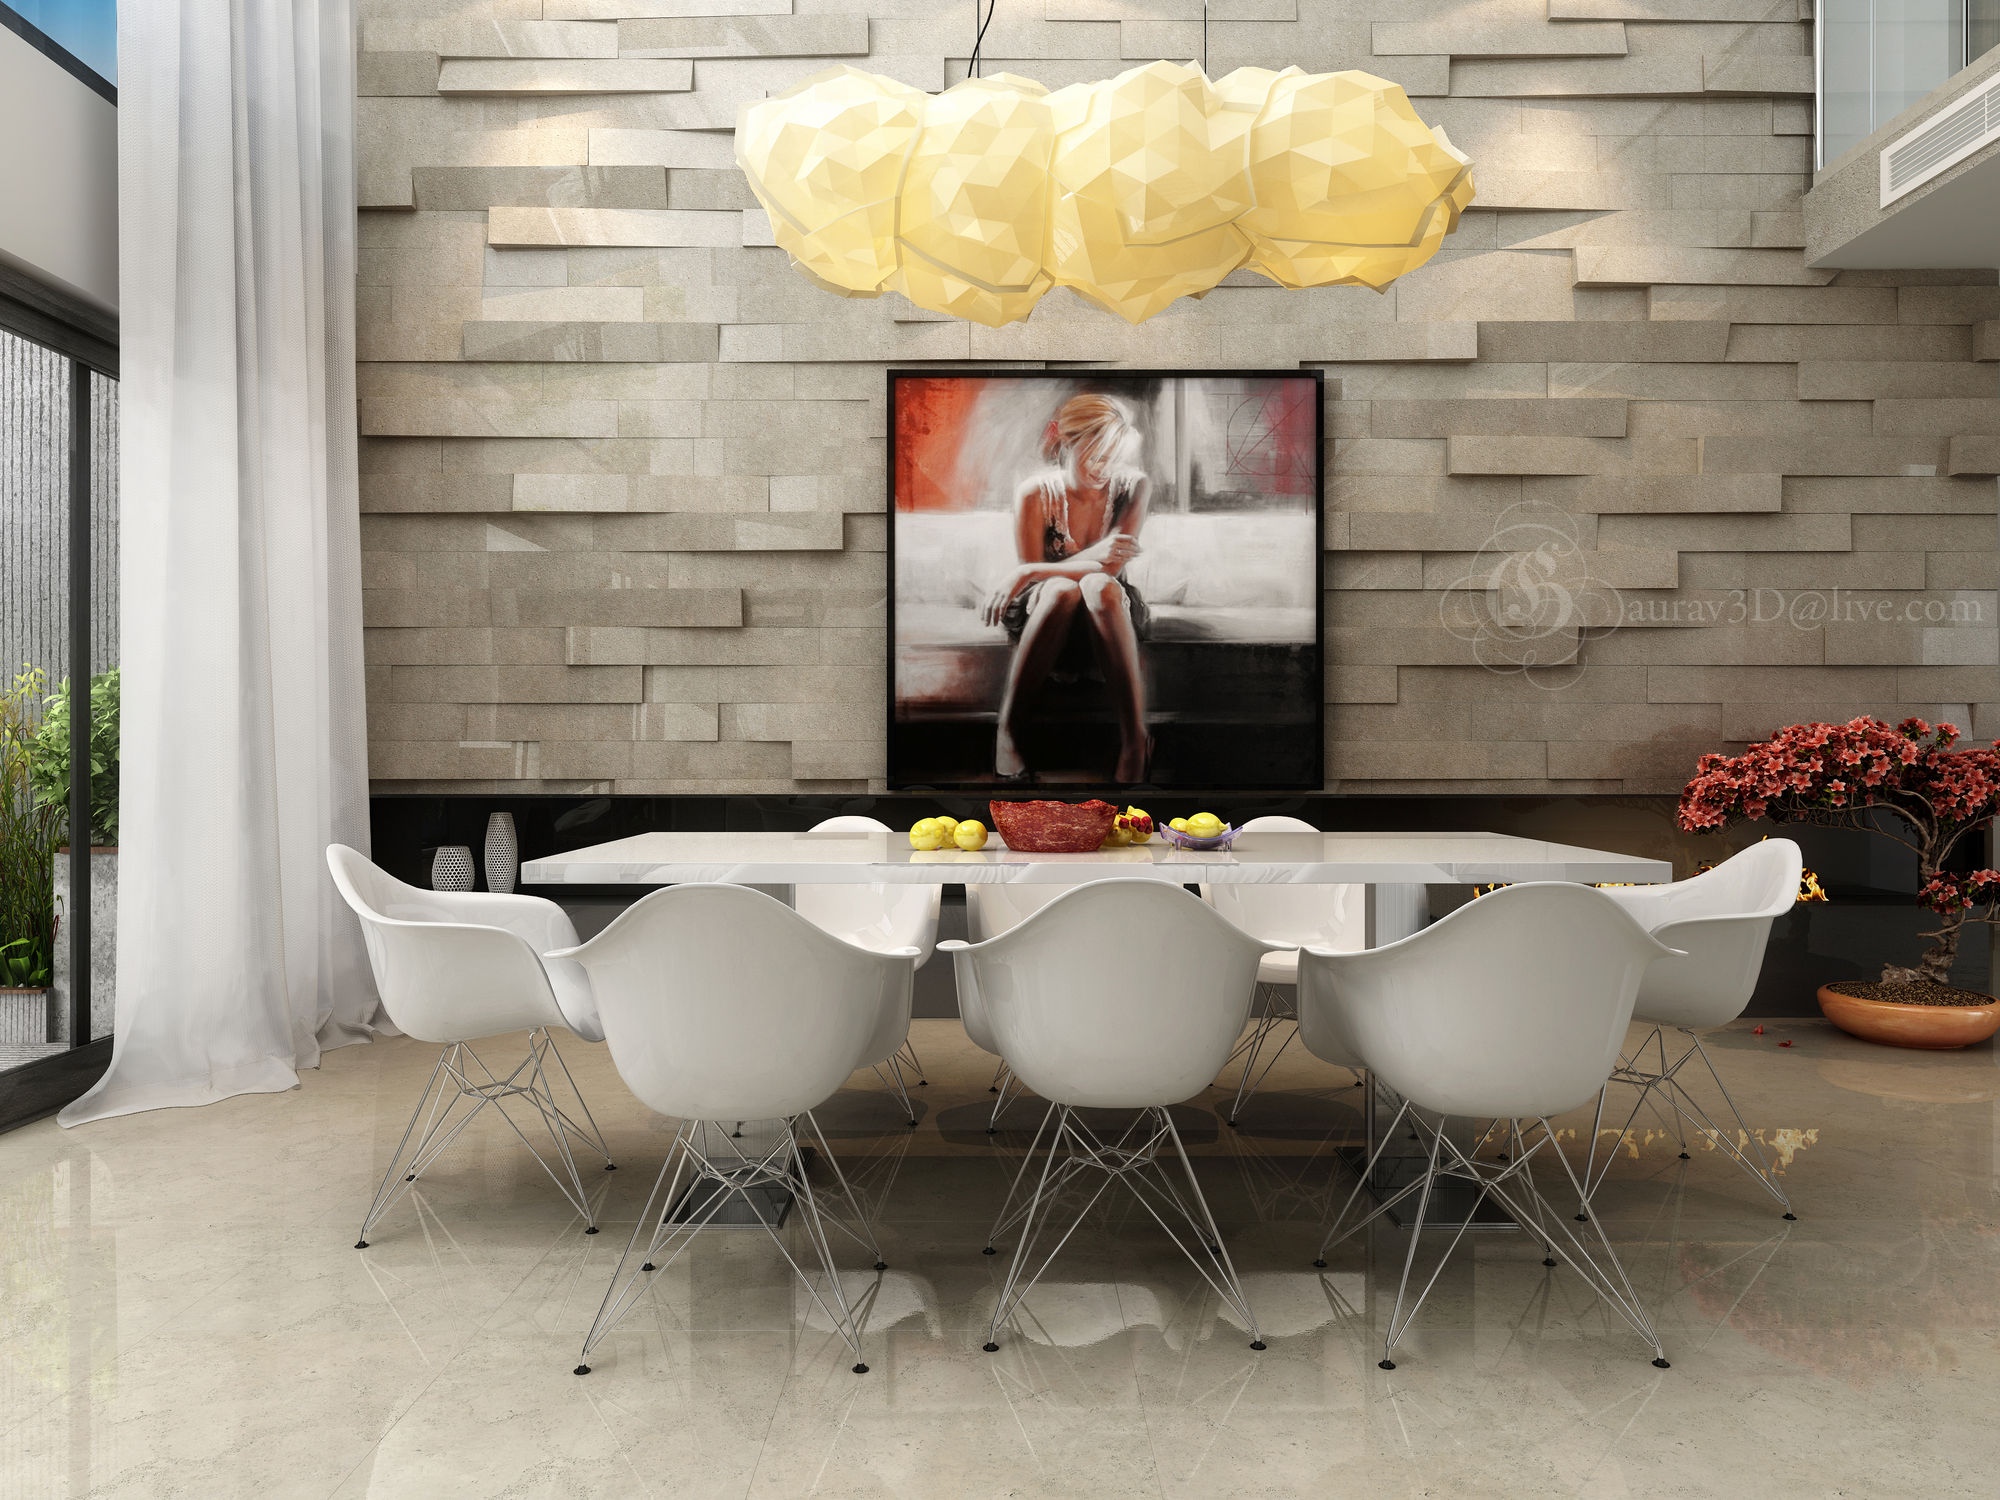 Design ideas for dining room concepts "width =" 2000 "height =" 1500 "srcset =" https://mileray.com/wp-content/uploads/2020/05/1588514029_362_10-Dining-Room-Concept-Design-Ideas-Which-Feels-Luxurious.jpeg 2000w, https://mileray.com/ wp- content / uploads / 2016/07 / Gaurav-300x225.jpeg 300w, https://mileray.com/wp-content/uploads/2016/07/Gaurav-768x576.jpeg 768w, https://mileray.com/ wp- content / uploads / 2016/07 / Gaurav-1024x768.jpeg 1024w, https://mileray.com/wp-content/uploads/2016/07/Gaurav-80x60.jpeg 80w, https://mileray.com/ wp- content / uploads / 2016/07 / Gaurav-265x198.jpeg 265w, https://mileray.com/wp-content/uploads/2016/07/Gaurav-696x522.jpeg 696w, https://mileray.com/ wp- content / uploads / 2016/07 / Gaurav-1068x801.jpeg 1068w, https://mileray.com/wp-content/uploads/2016/07/Gaurav-560x420.jpeg 560w "sizes =" (maximum width: 2000px) 100vw , 2000px